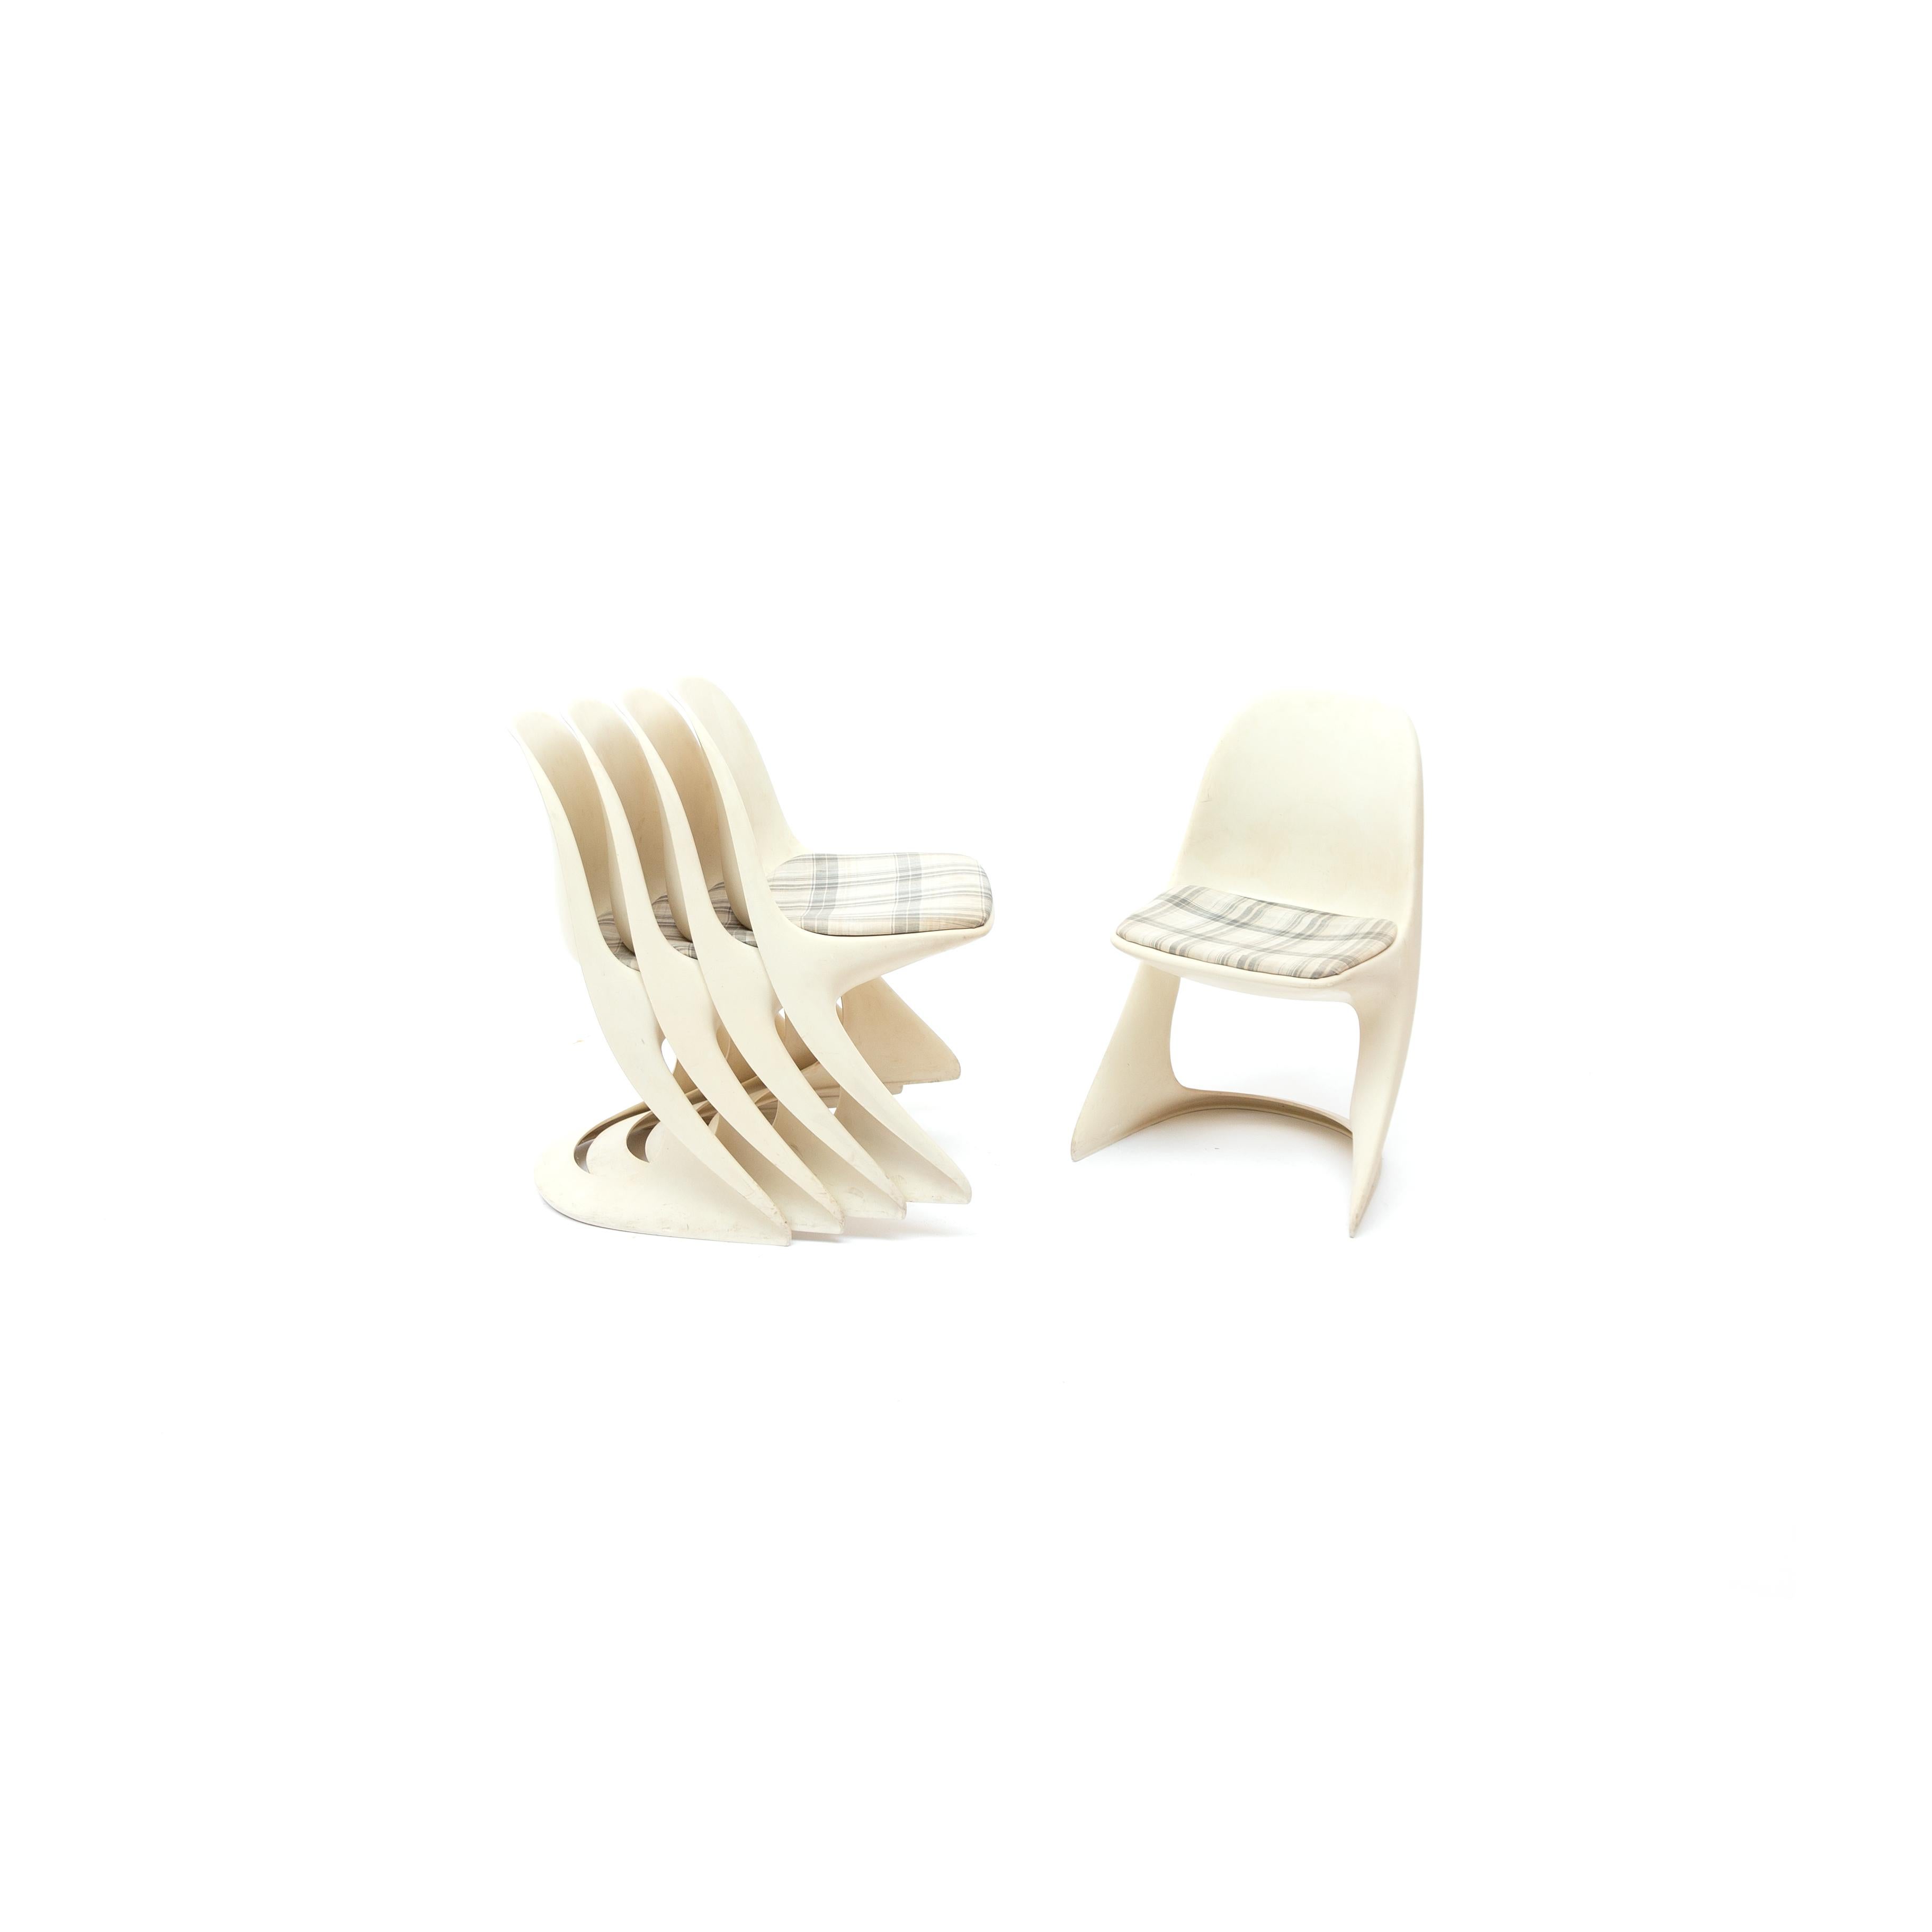 Chair “Cantilever 290”: solid cast plastic structure. Published by “Cado” in 1970.

The five chairs have a white plastic seat frame and a seat made of checked textile fabric. Also the chairs are stackable. The design for these chairs was created